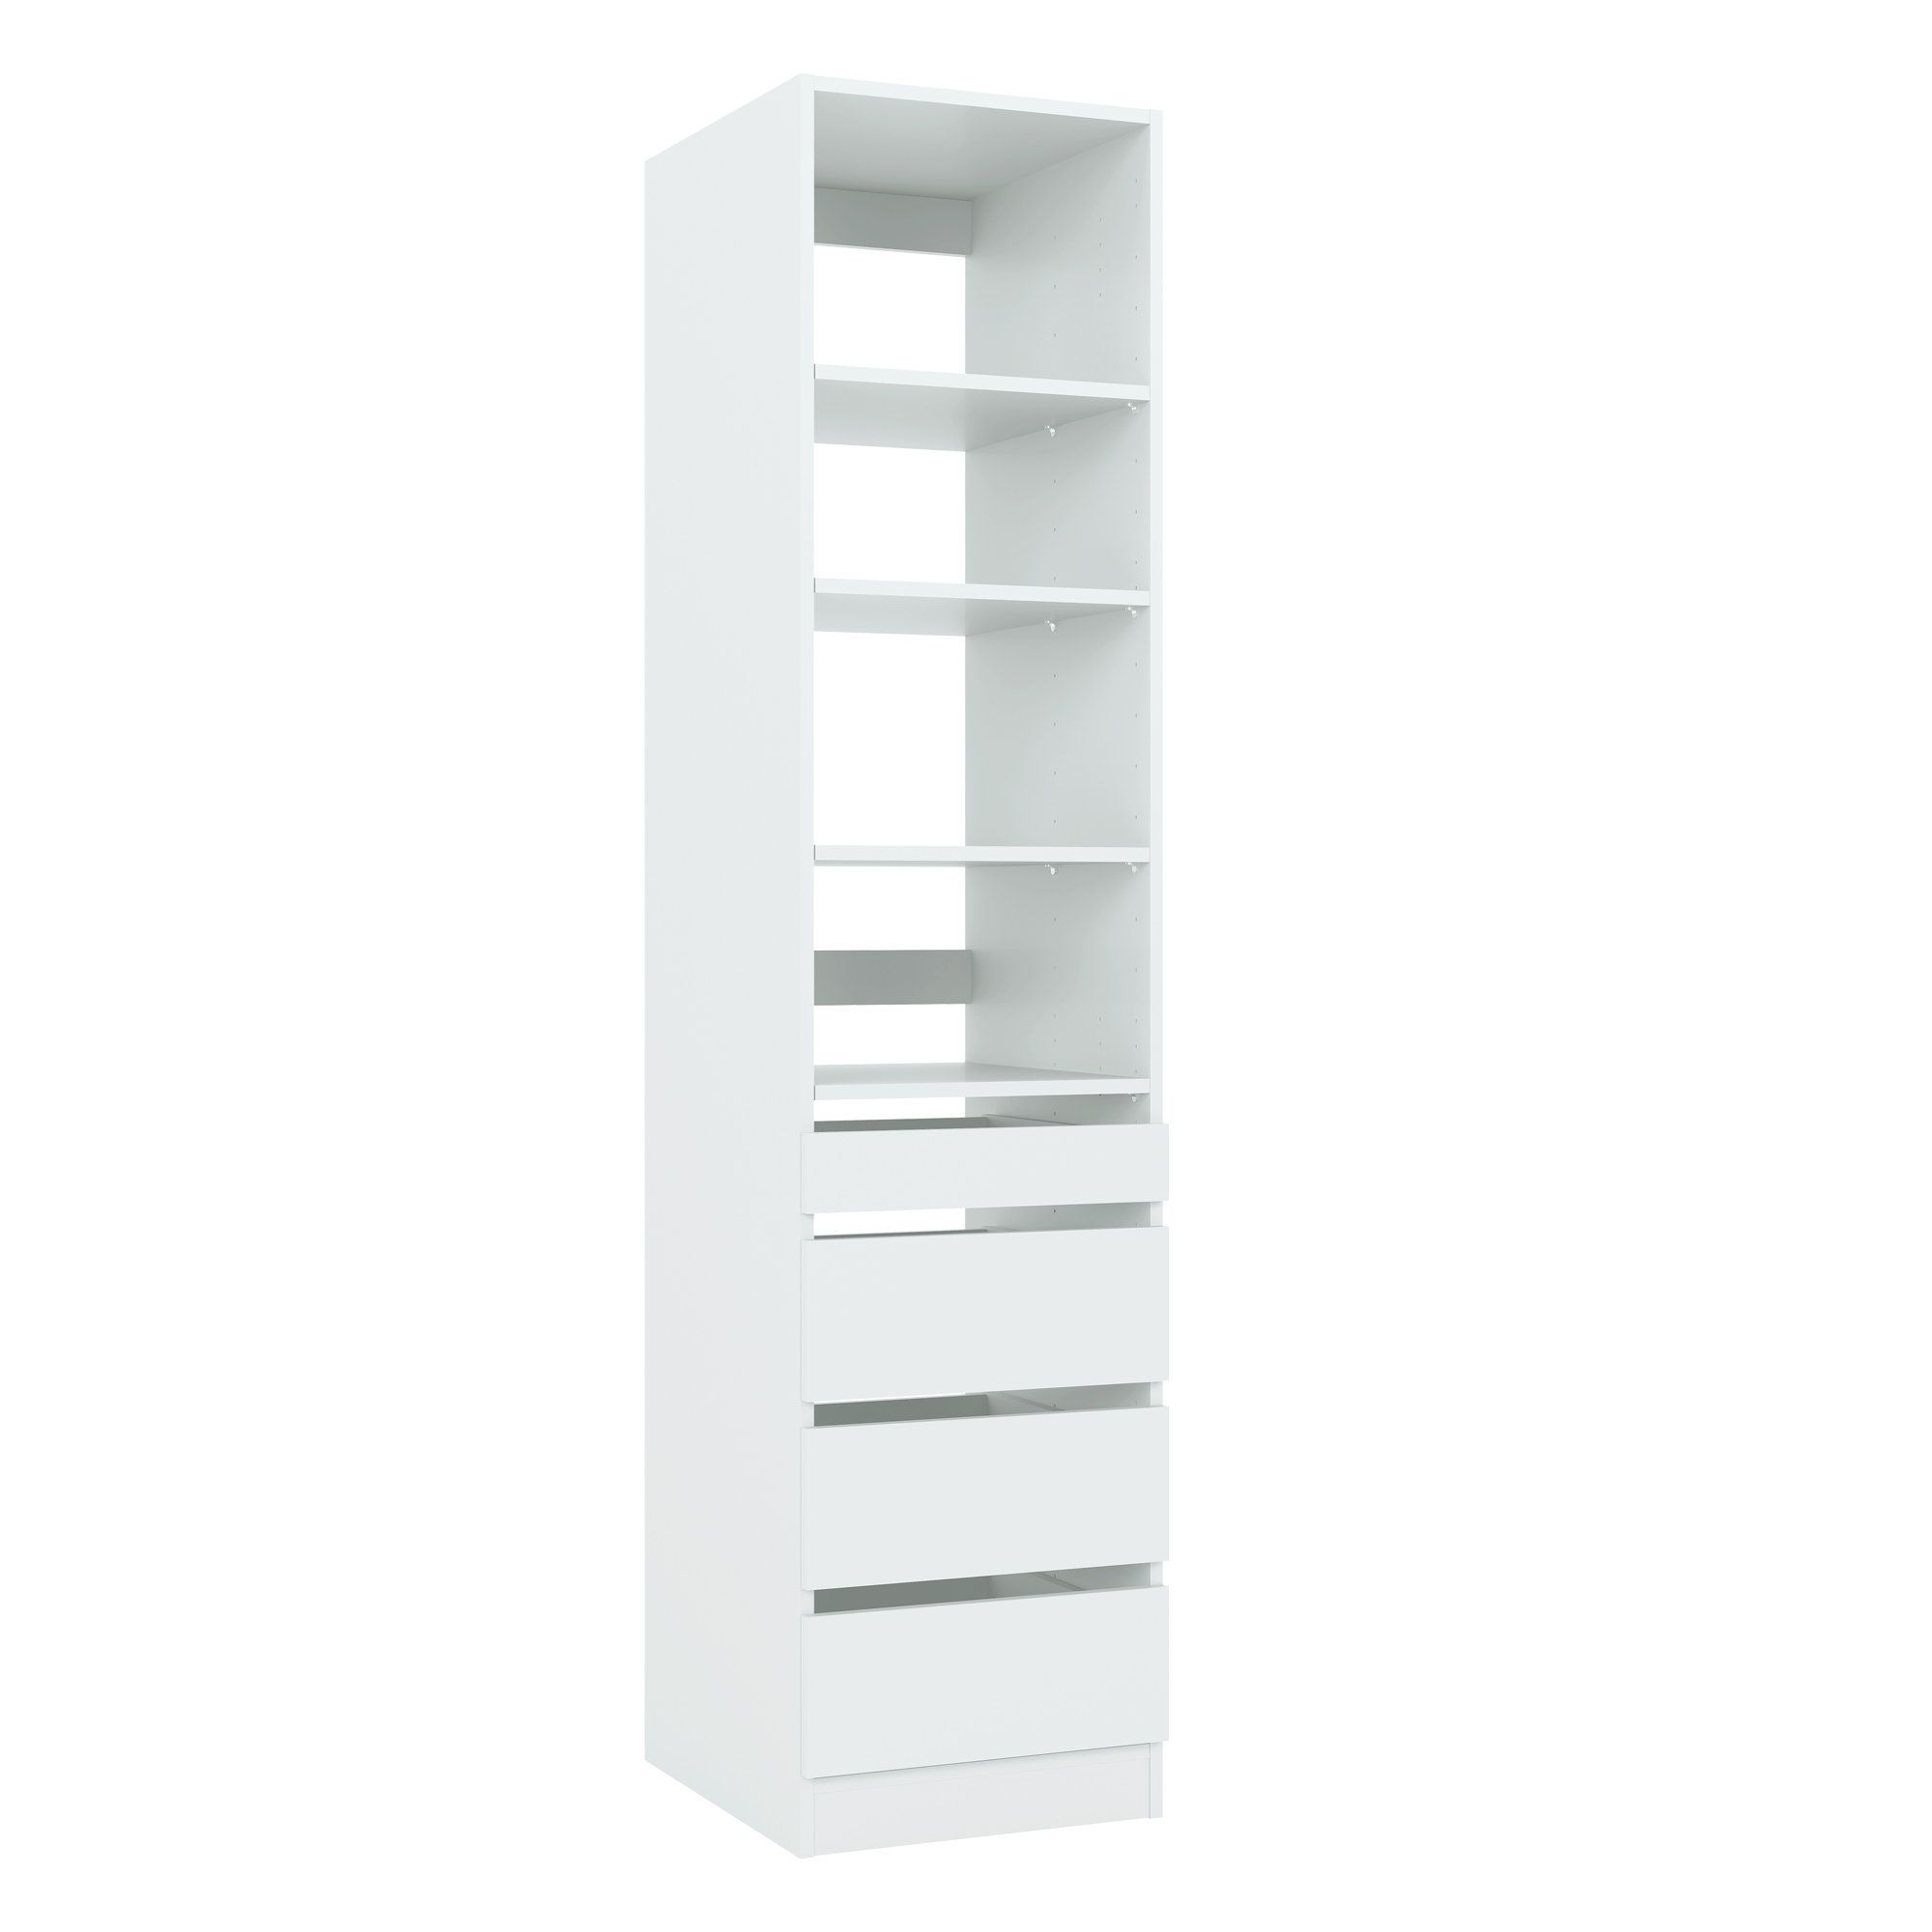 Closet & Co 18'' W Closet System Walk In Tower | Wayfair With Regard To Wardrobes With 3 Shelving Towers (View 8 of 15)